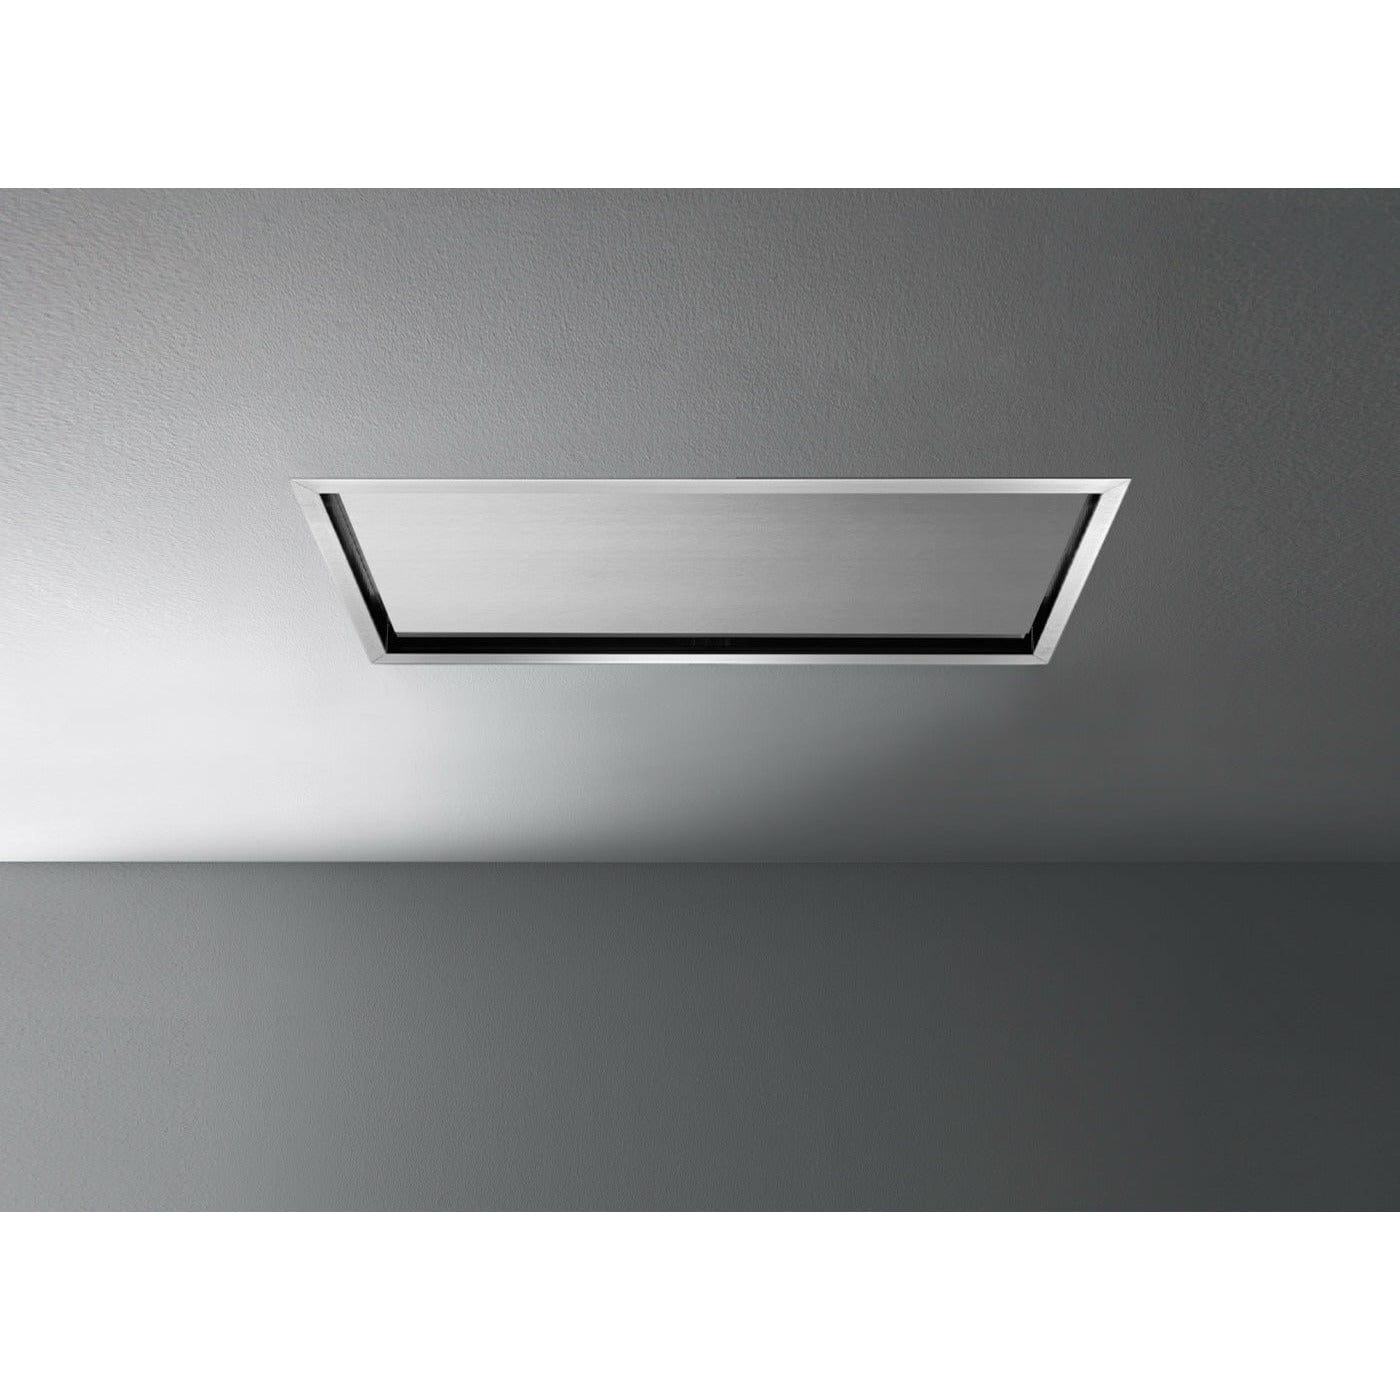 Falmec Nube Ceiling 36" Liner Insert,  with 600 CFM Motor (Motor Sold Separately), Electronic Control, Metallic Grease Filter, Scotch Brite Stainless Steel (AISI 304), Perimeter Suction, and Remote Control Included - FDNUB36C6SS-R Range Hoods FDNUB36C6SS-R Luxury Appliances Direct